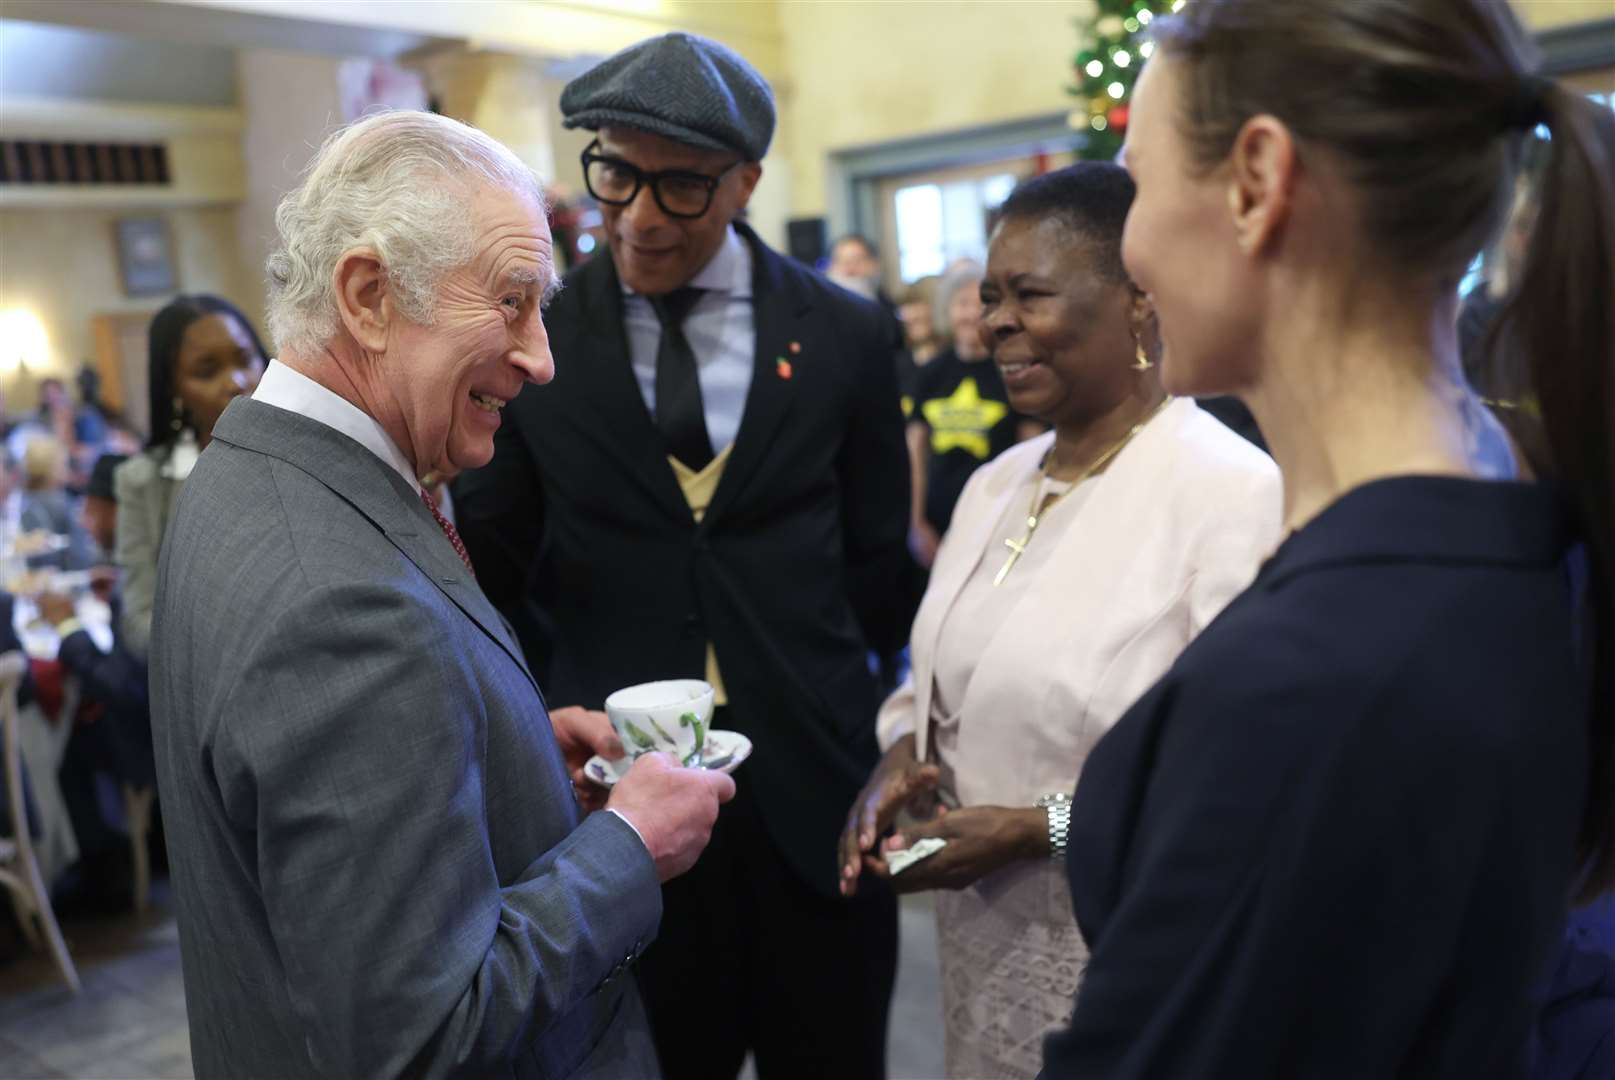 The King chatted with Jay Blades, left, during his birthday party at Highgrove (Chris Jackson/PA)